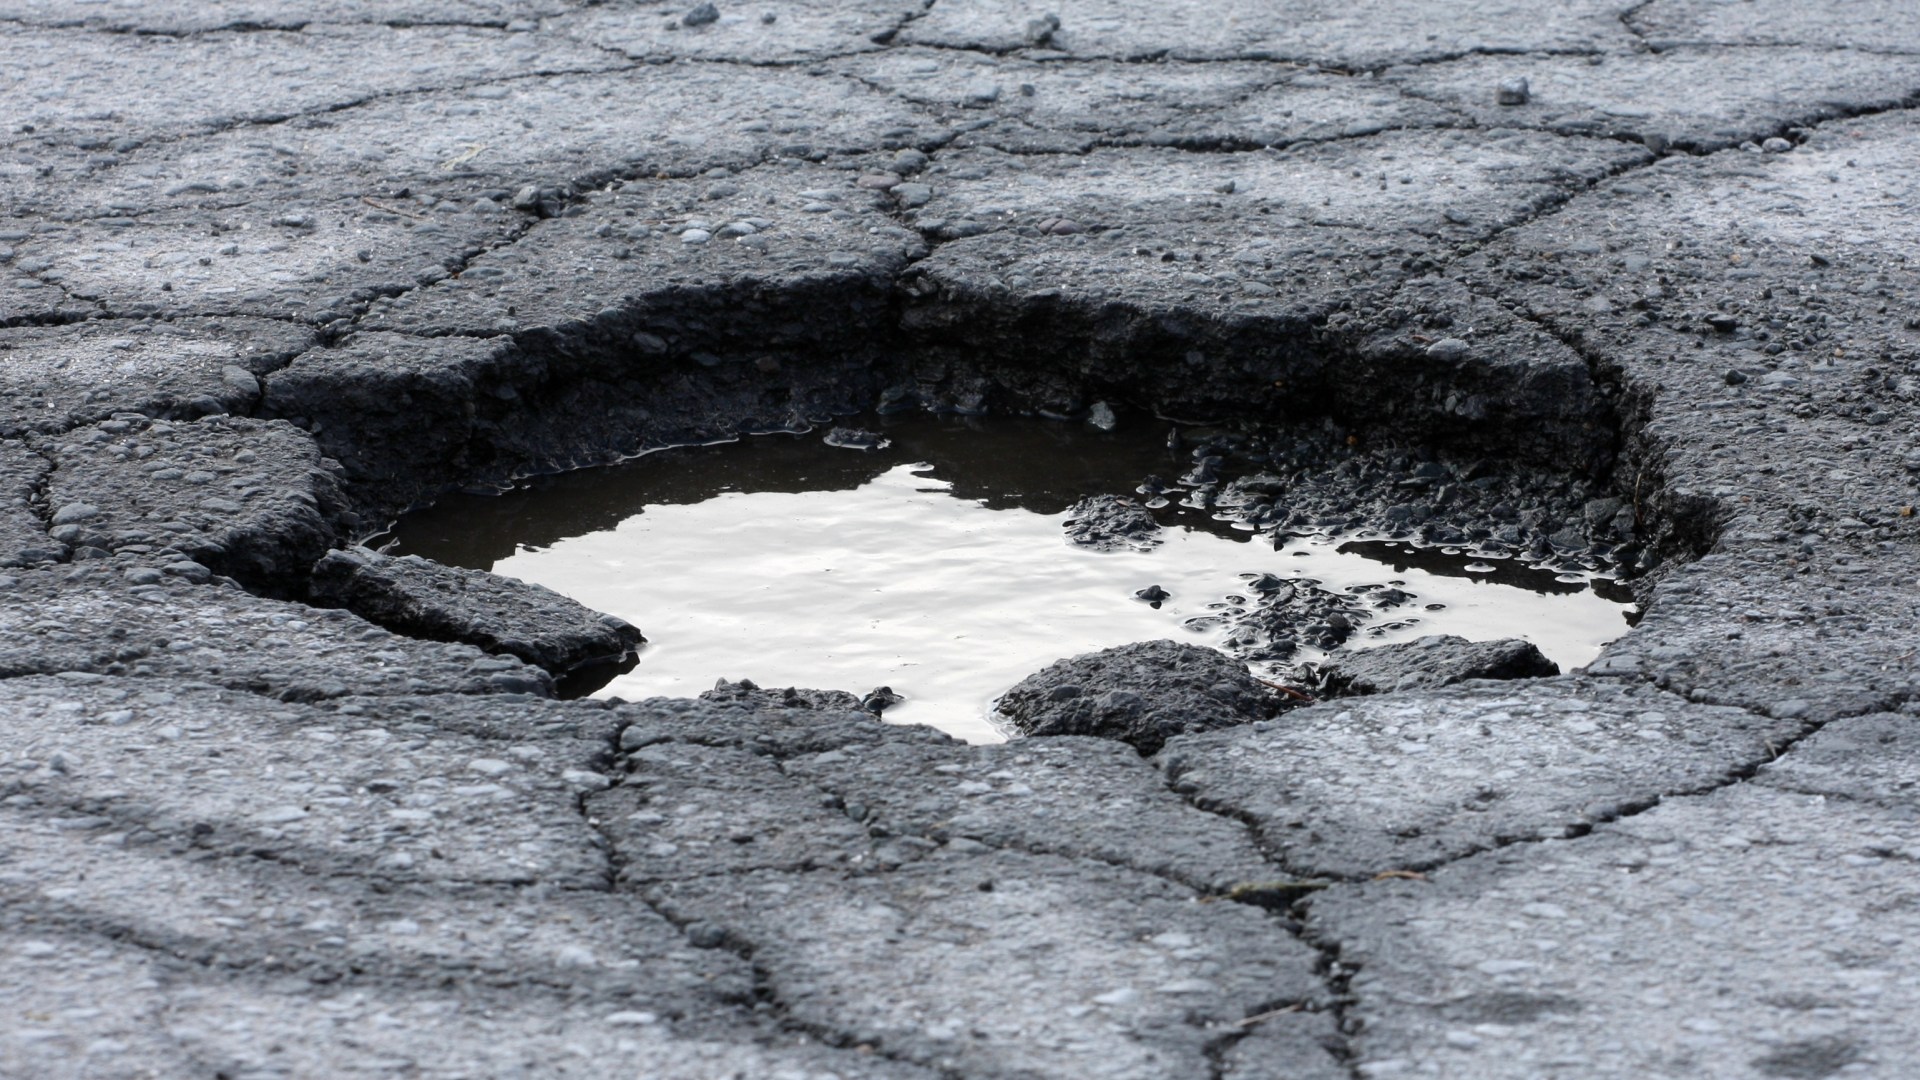 Staggering cost of potholes to UK economy revealed in shock report which demands government fixes UK’s crumbling roads [Video]